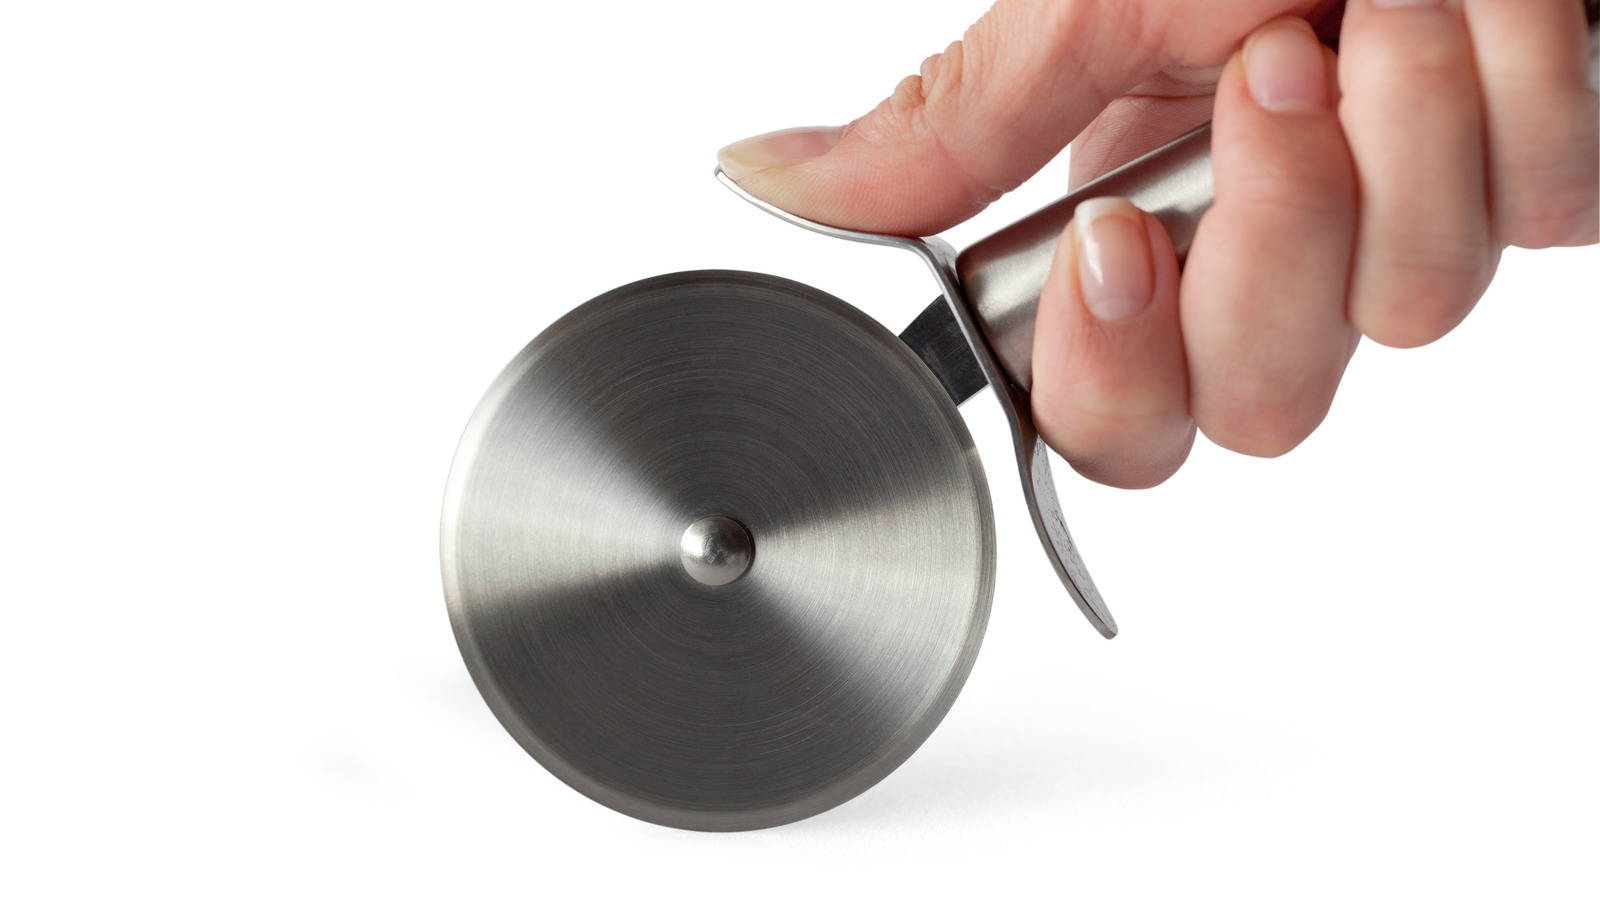 https://www.thedailymeal.com/img/gallery/your-pizza-cutter-unexpectedly-comes-in-handy-for-herbs/l-intro-1684422985.jpg